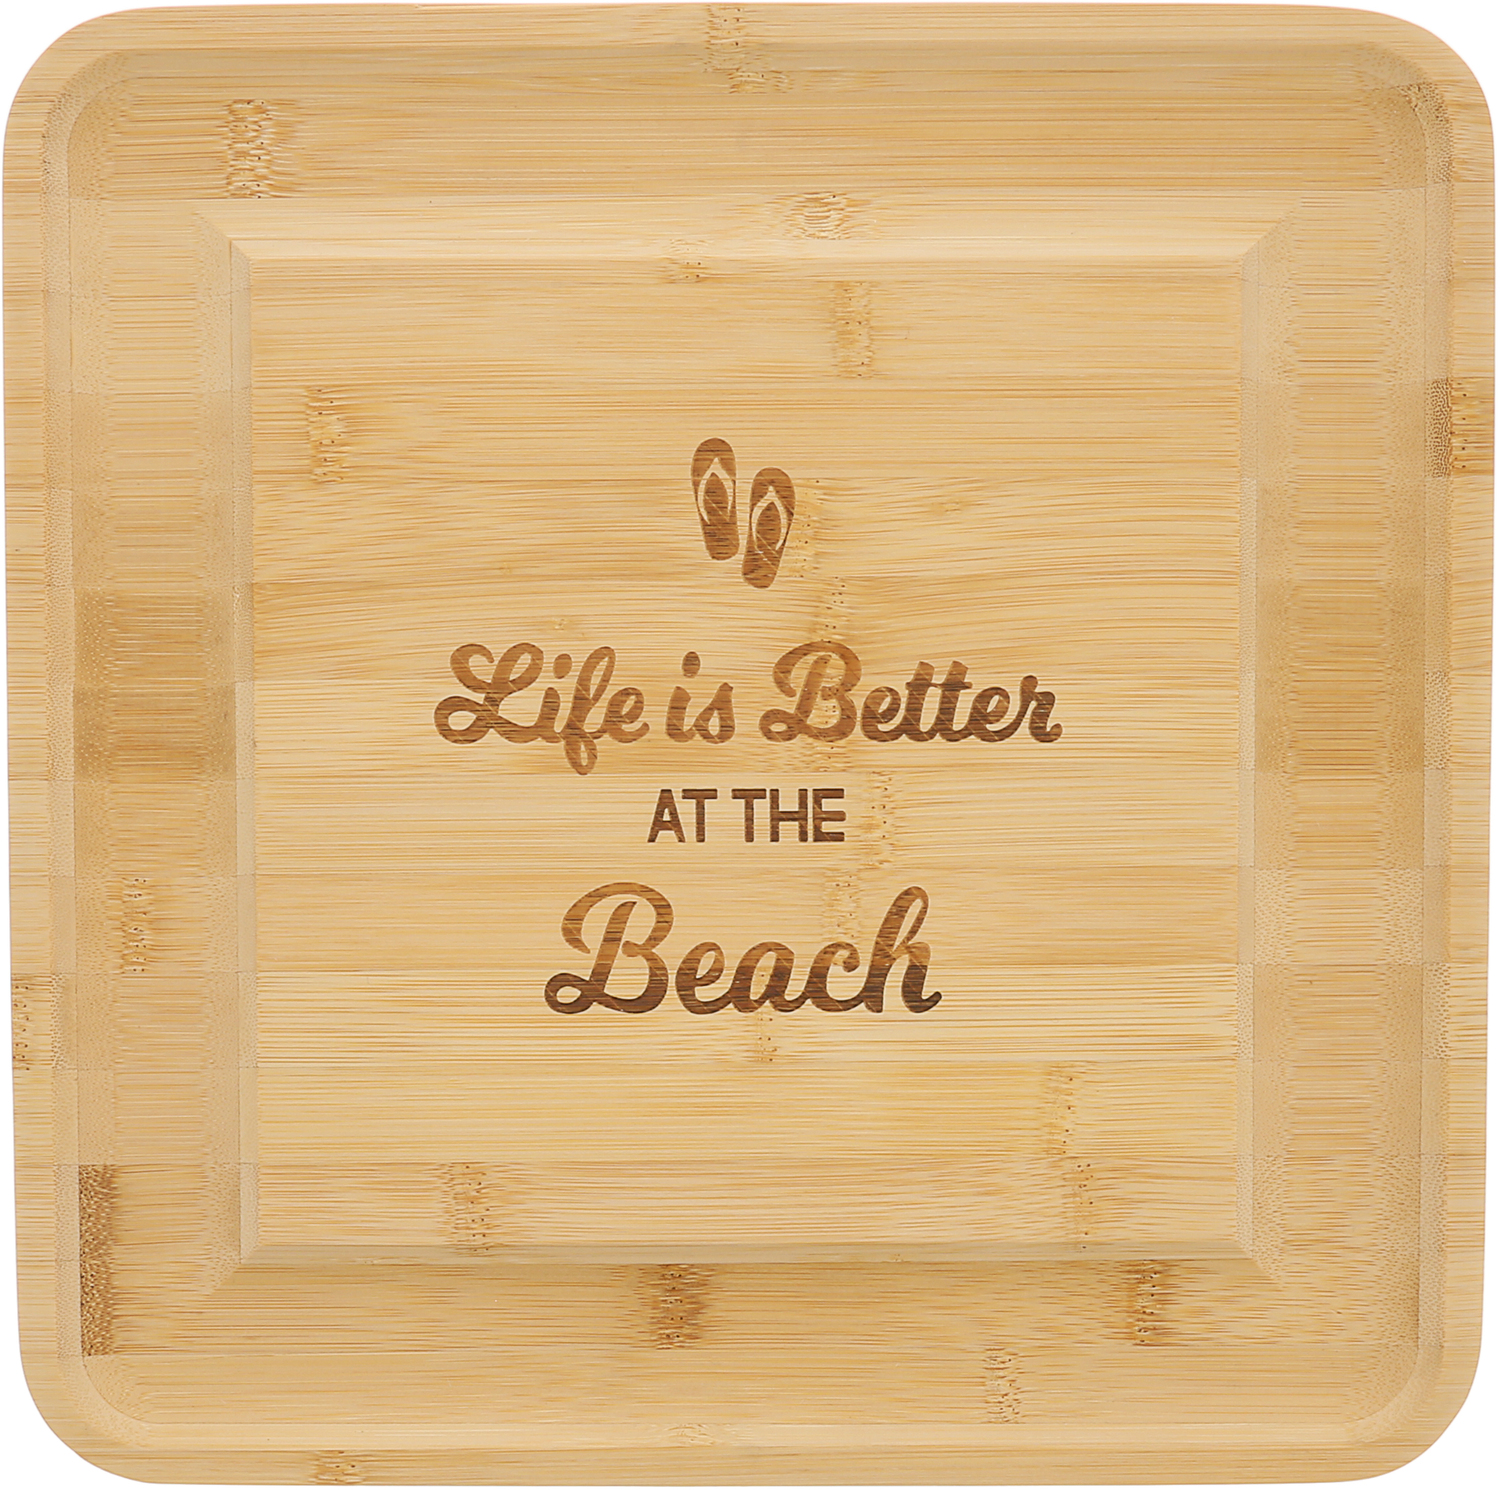 At The Beach by We People - At The Beach - 13" Bamboo Serving Board with Utensils